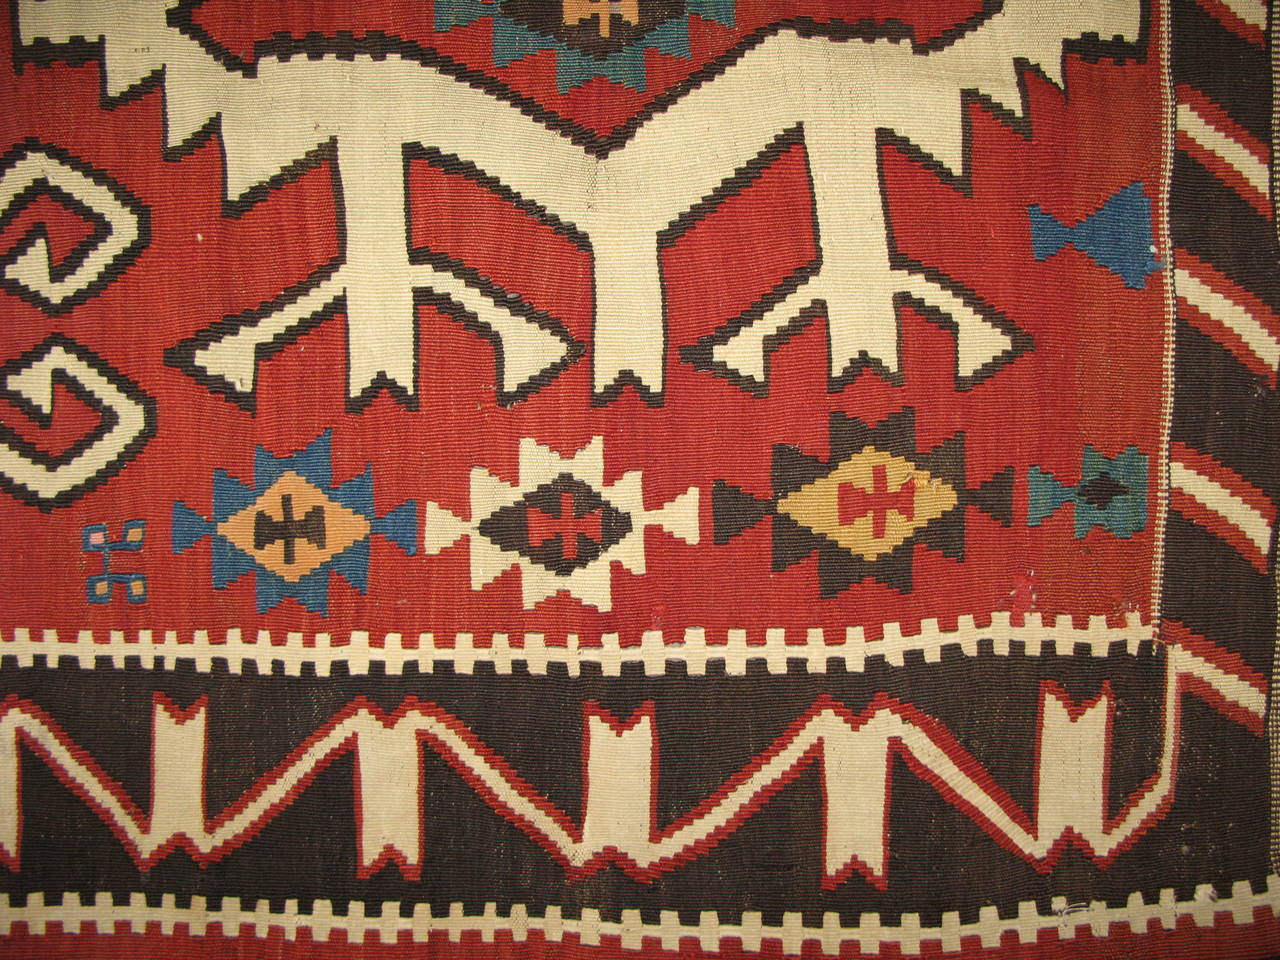 Antique Kilim long carpet, Kuba, late 19th century. An impressive design of serrated palmette medallions on a soft red field on this magnificent antique Kuba Kilim. The form of these palmettes recall the great classical carpets of the Caucasus, or